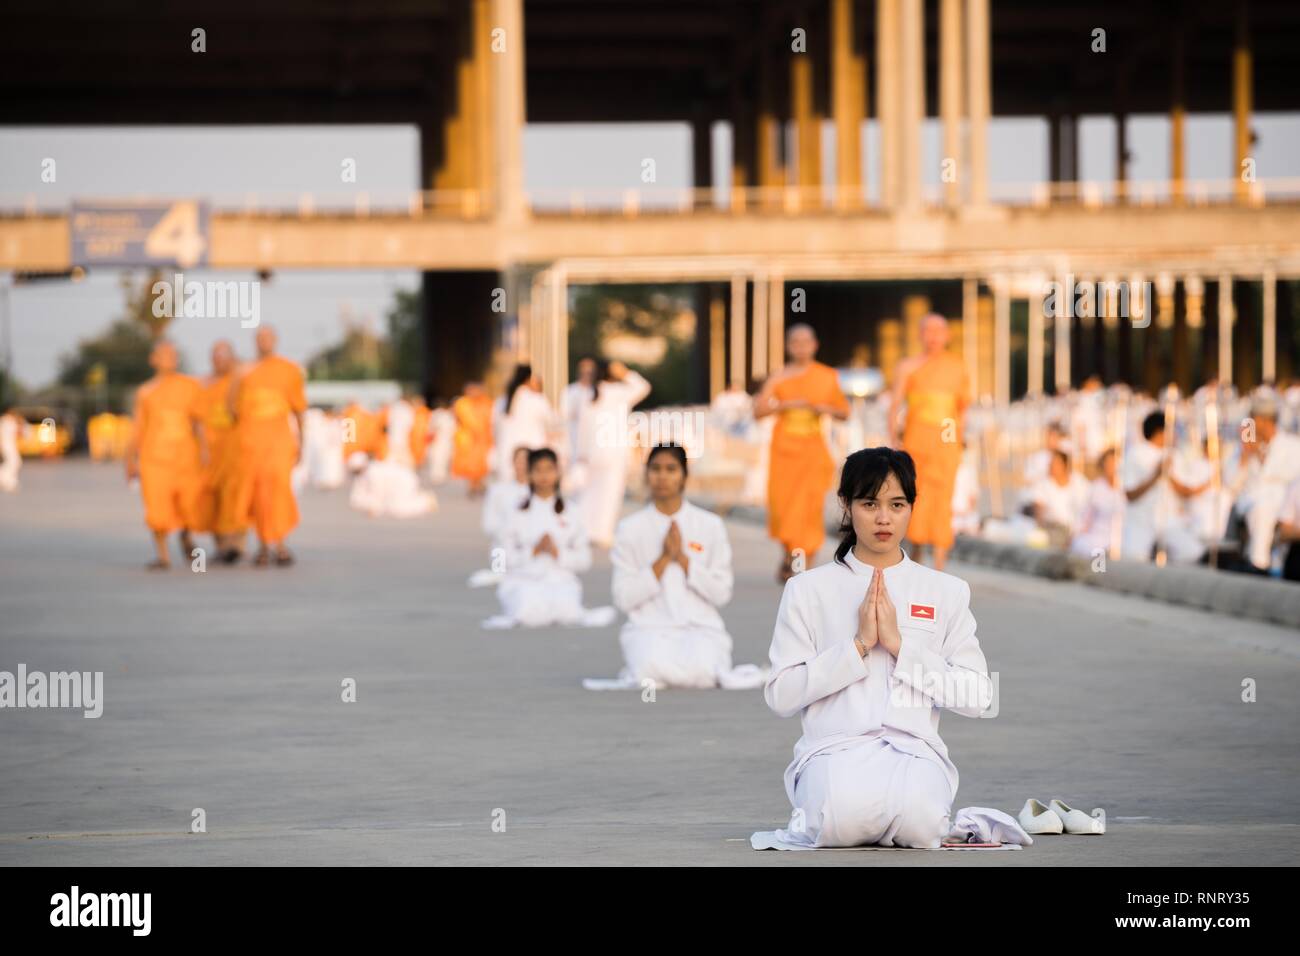 A woman seen meditating during the yearly Makha Bucha ceremony. Buddhist devotees celebrate the annual festival of Makha Bucha, one of the most important day for buddhists around the world. More than a thousand monks and hundred of thousand devotees were gathering at Dhammakaya Temple in Bangkok to attend the lighting ceremony Stock Photo